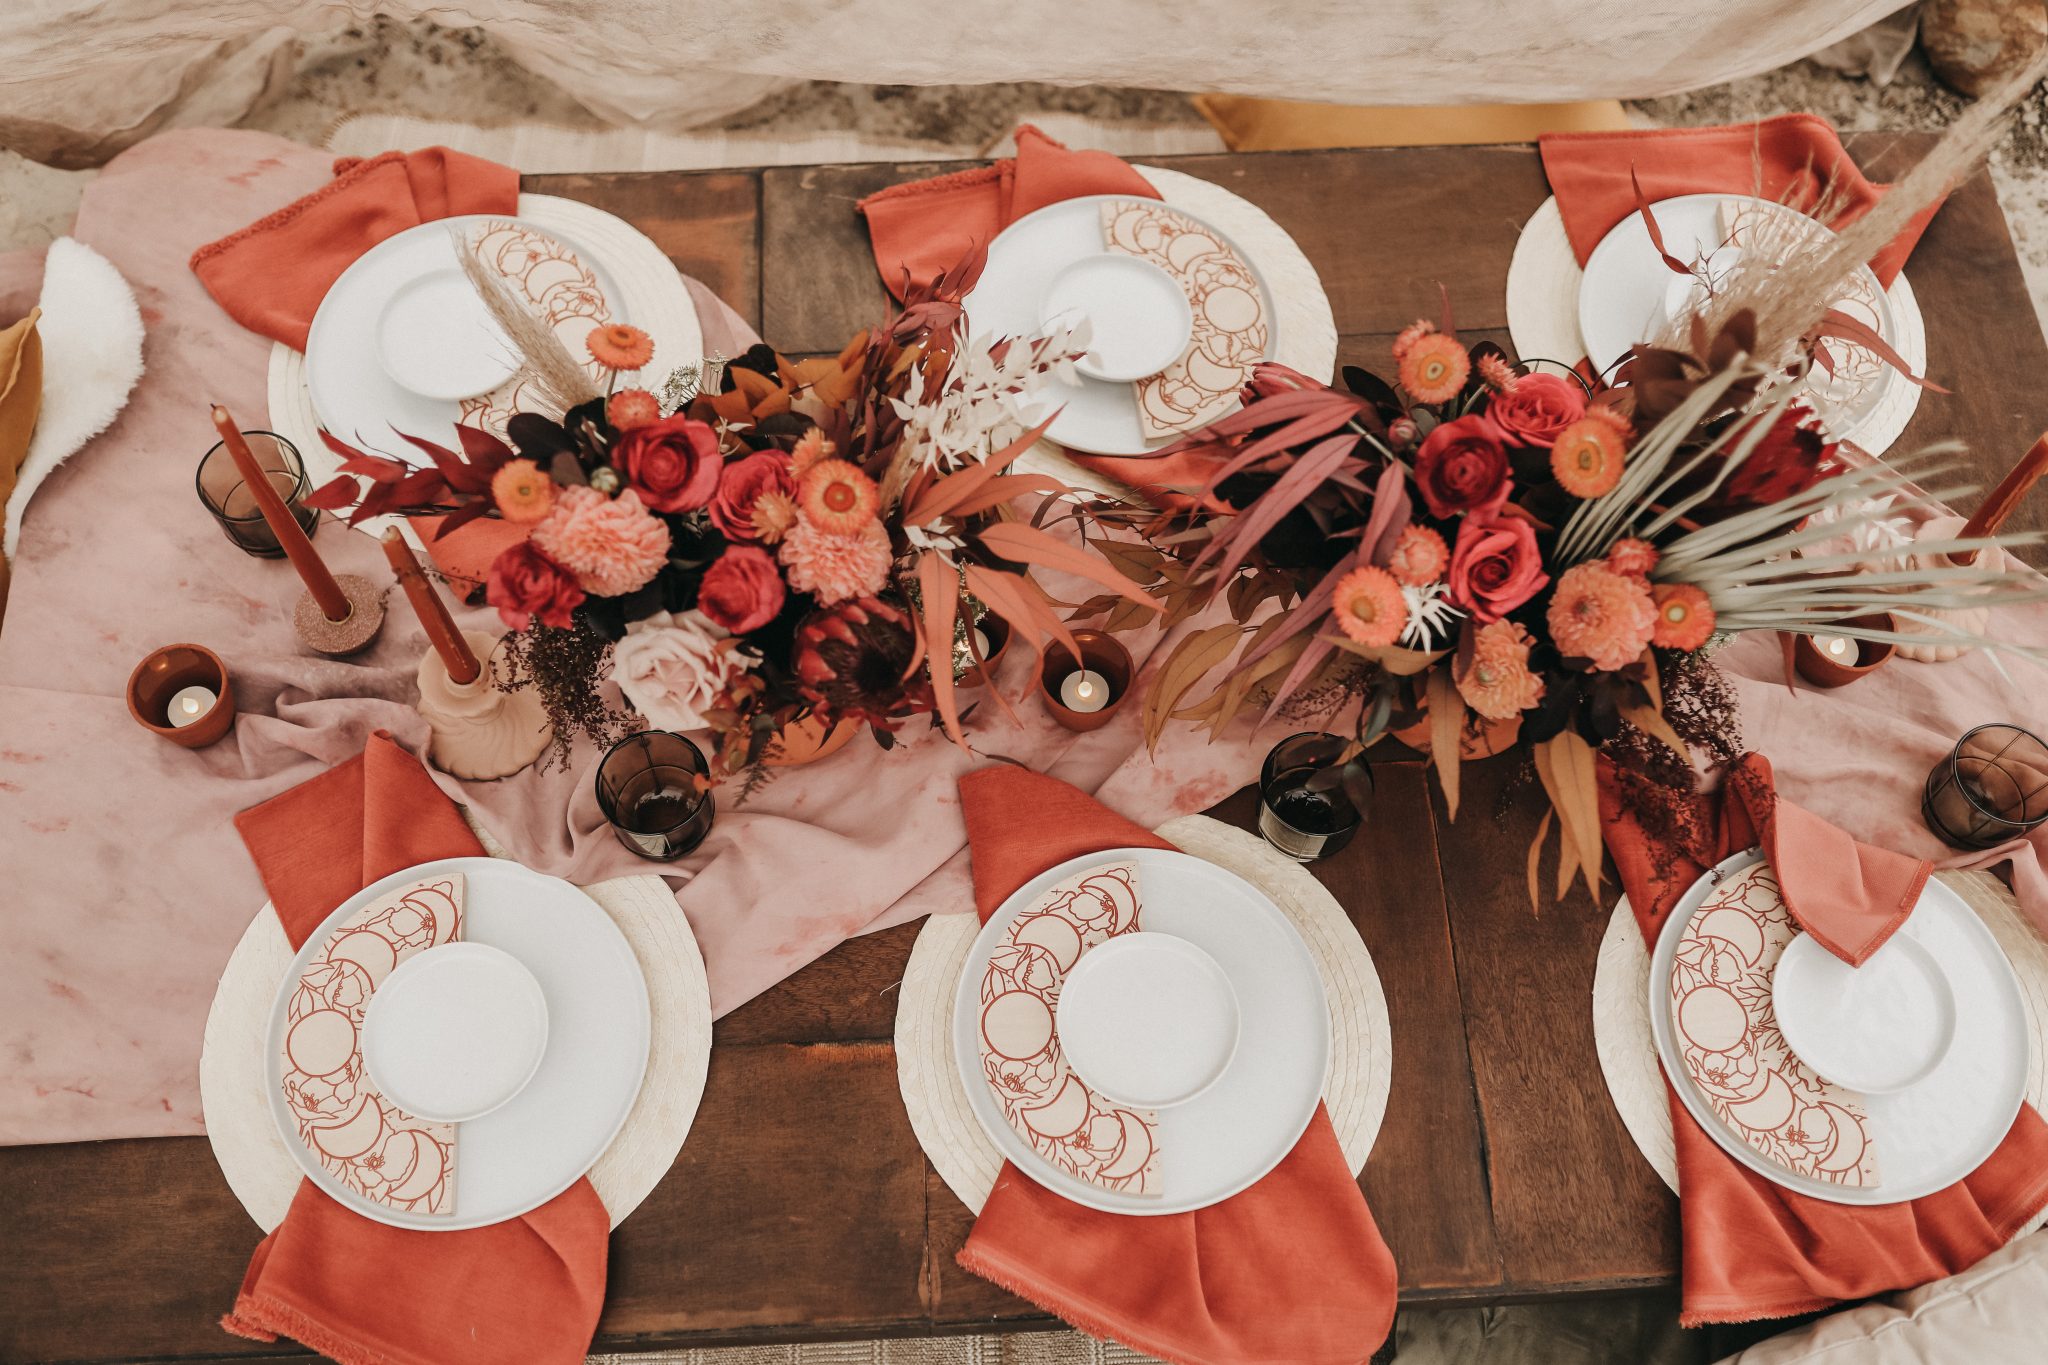 Moroccan elopement inspiration for a tablescape with moon cycle stationery and terracotta accents